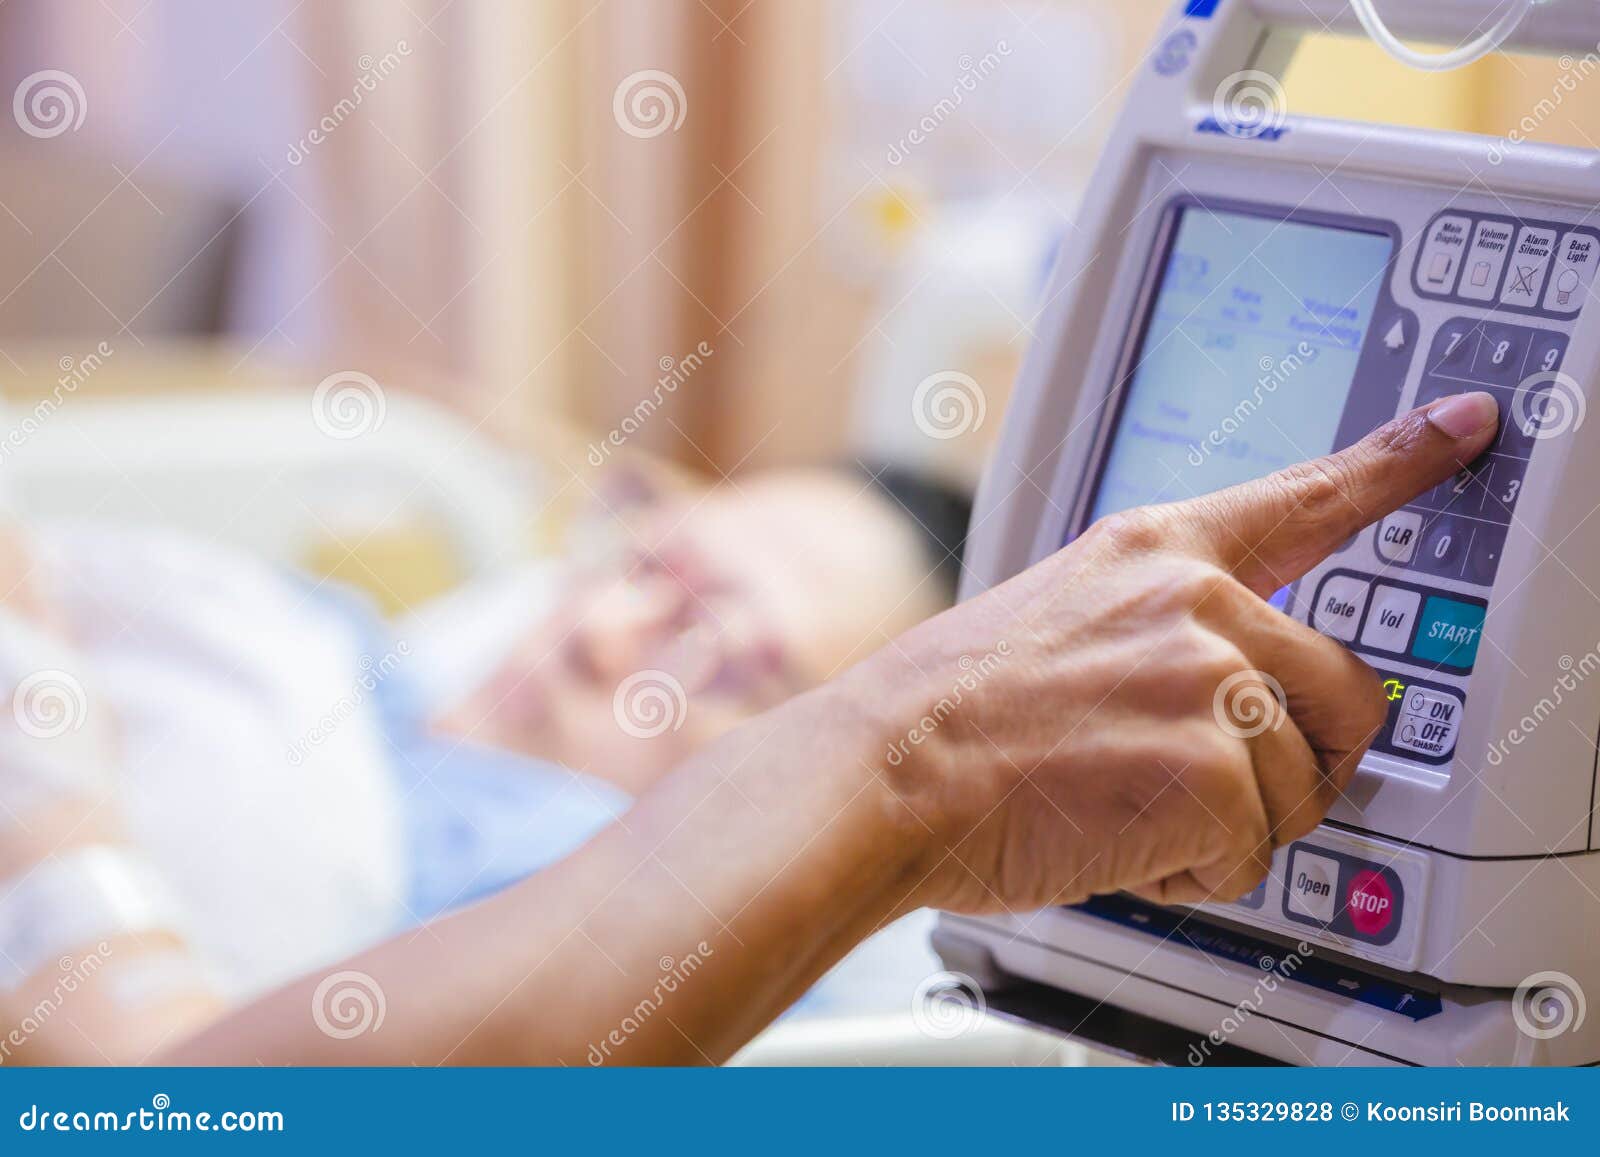 fingers press control panel for adjust infusion pumps with blurry patient